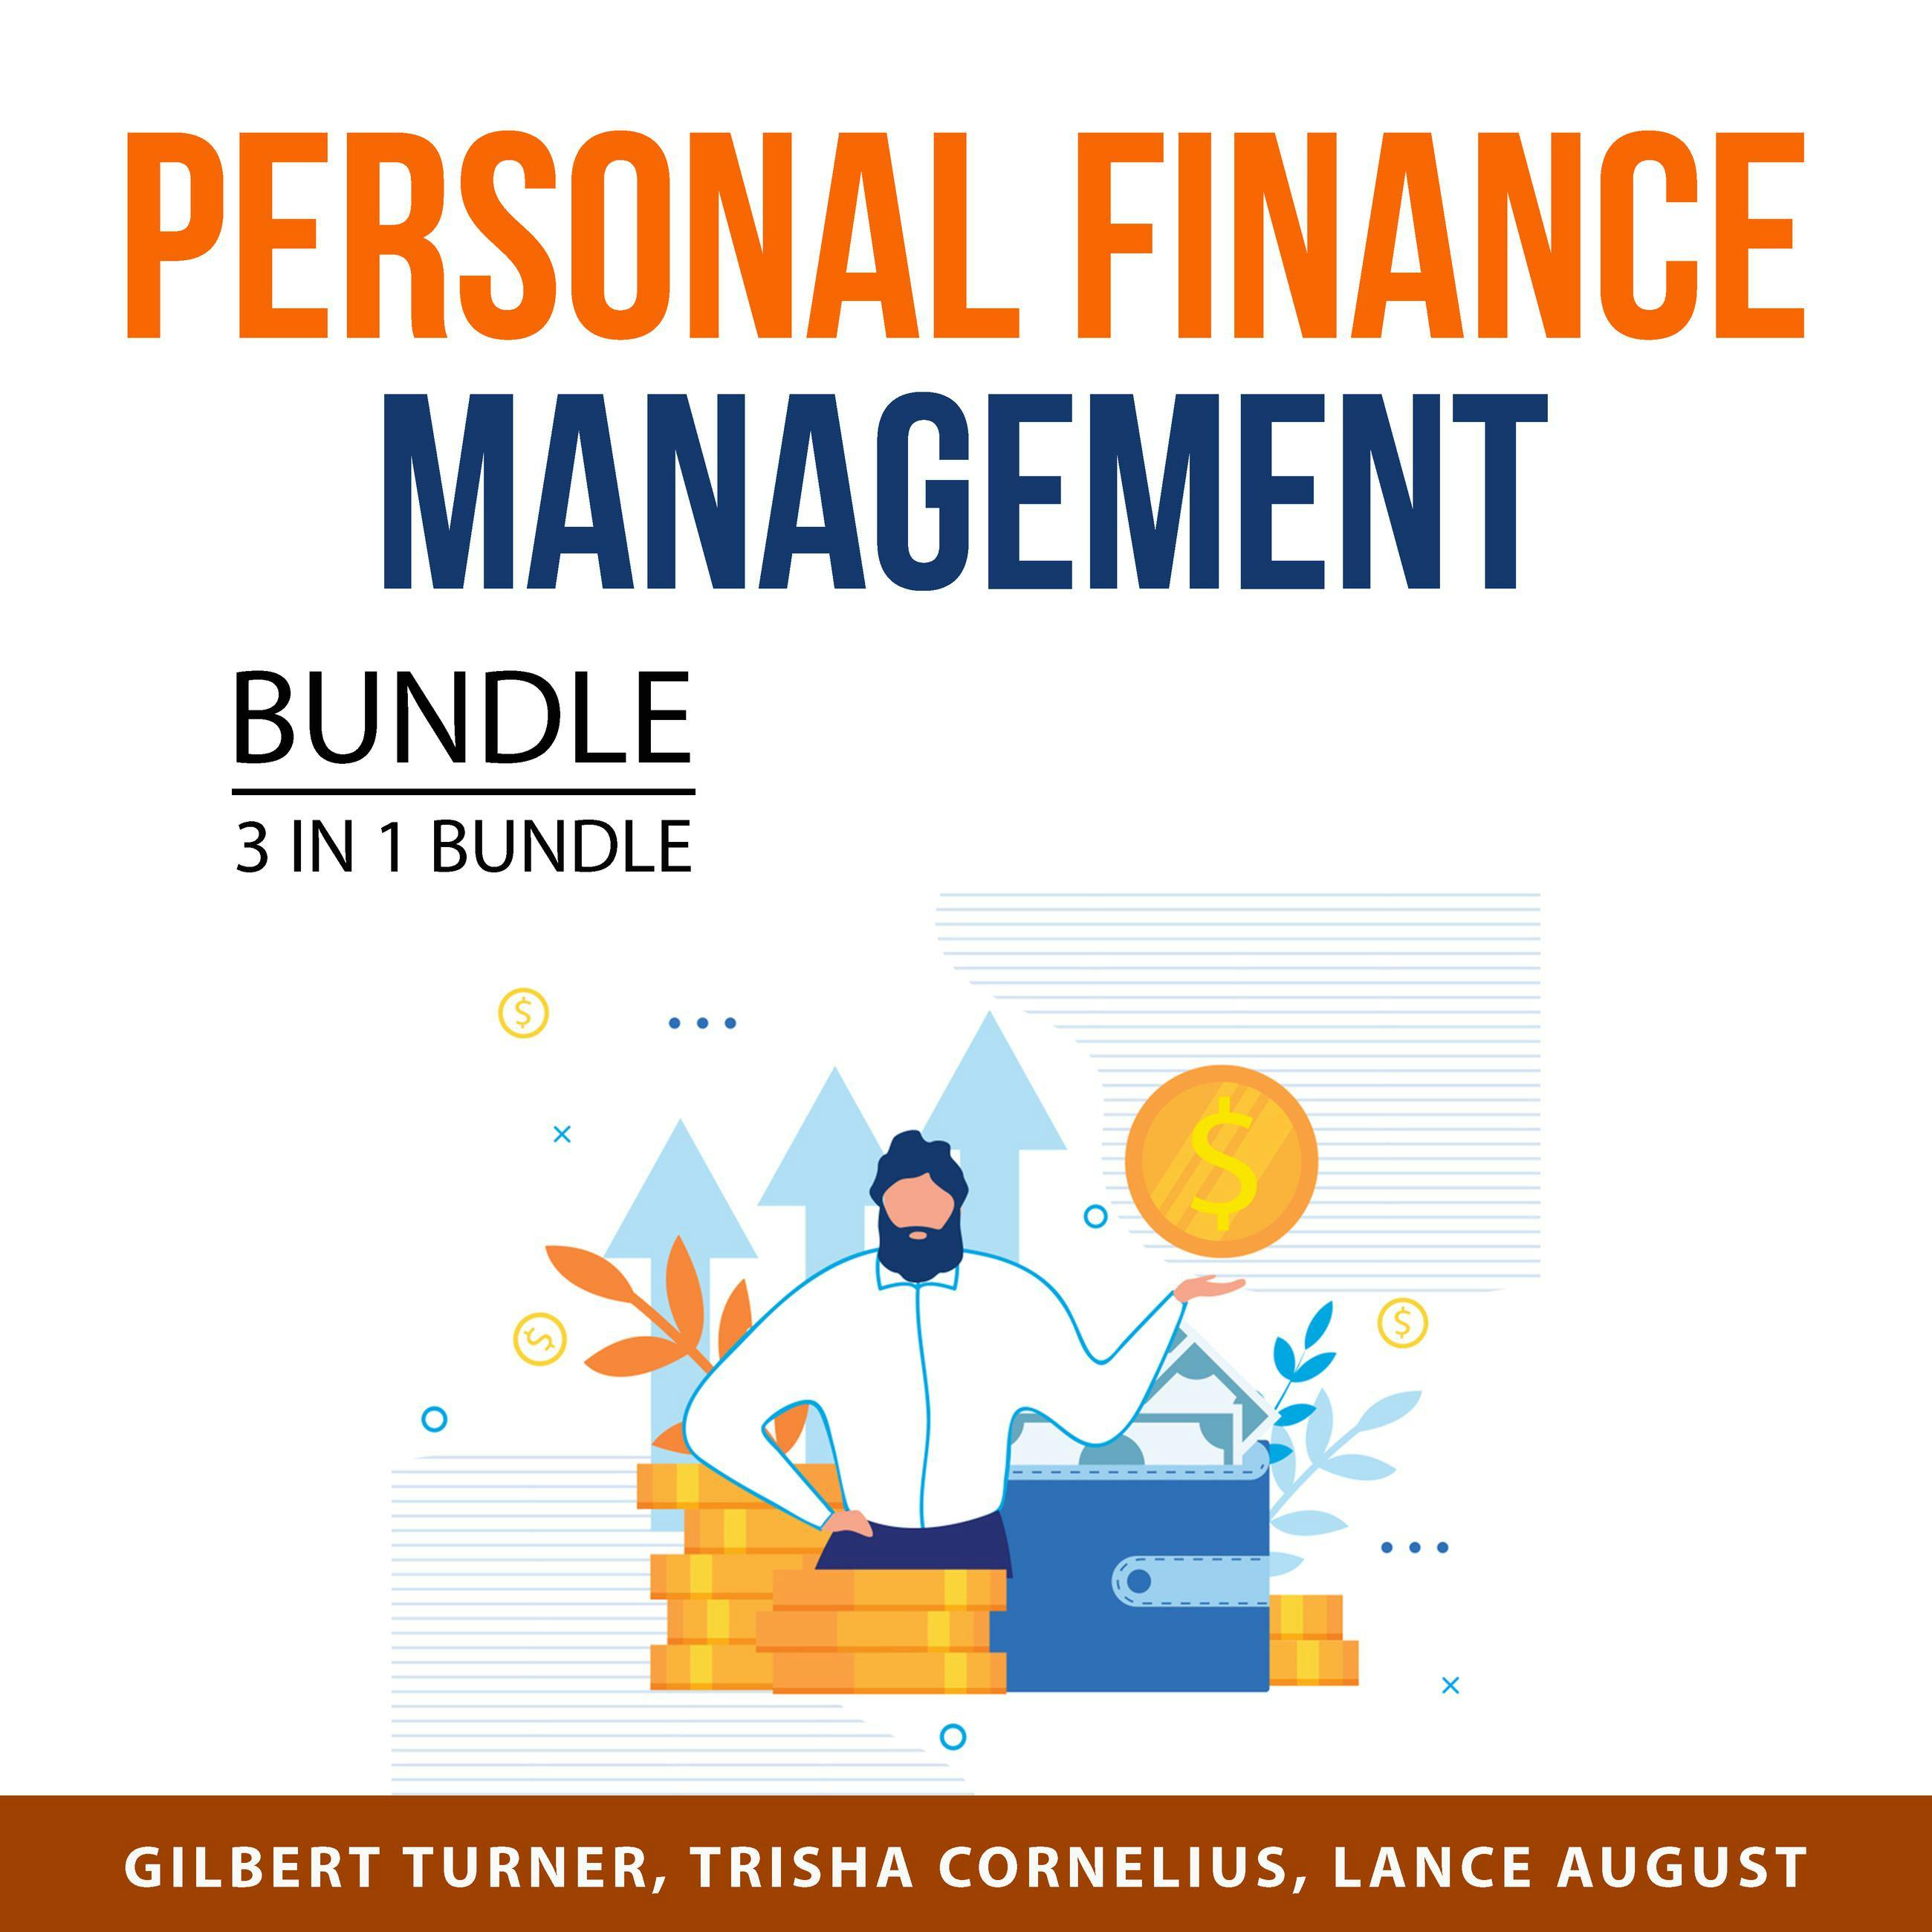 Personal Finance Management Bundle, 3 in 1 Bundle: Increase Your Financial IQ, Financial Planning and Budgeting, Financial Independence Blueprint - undefined